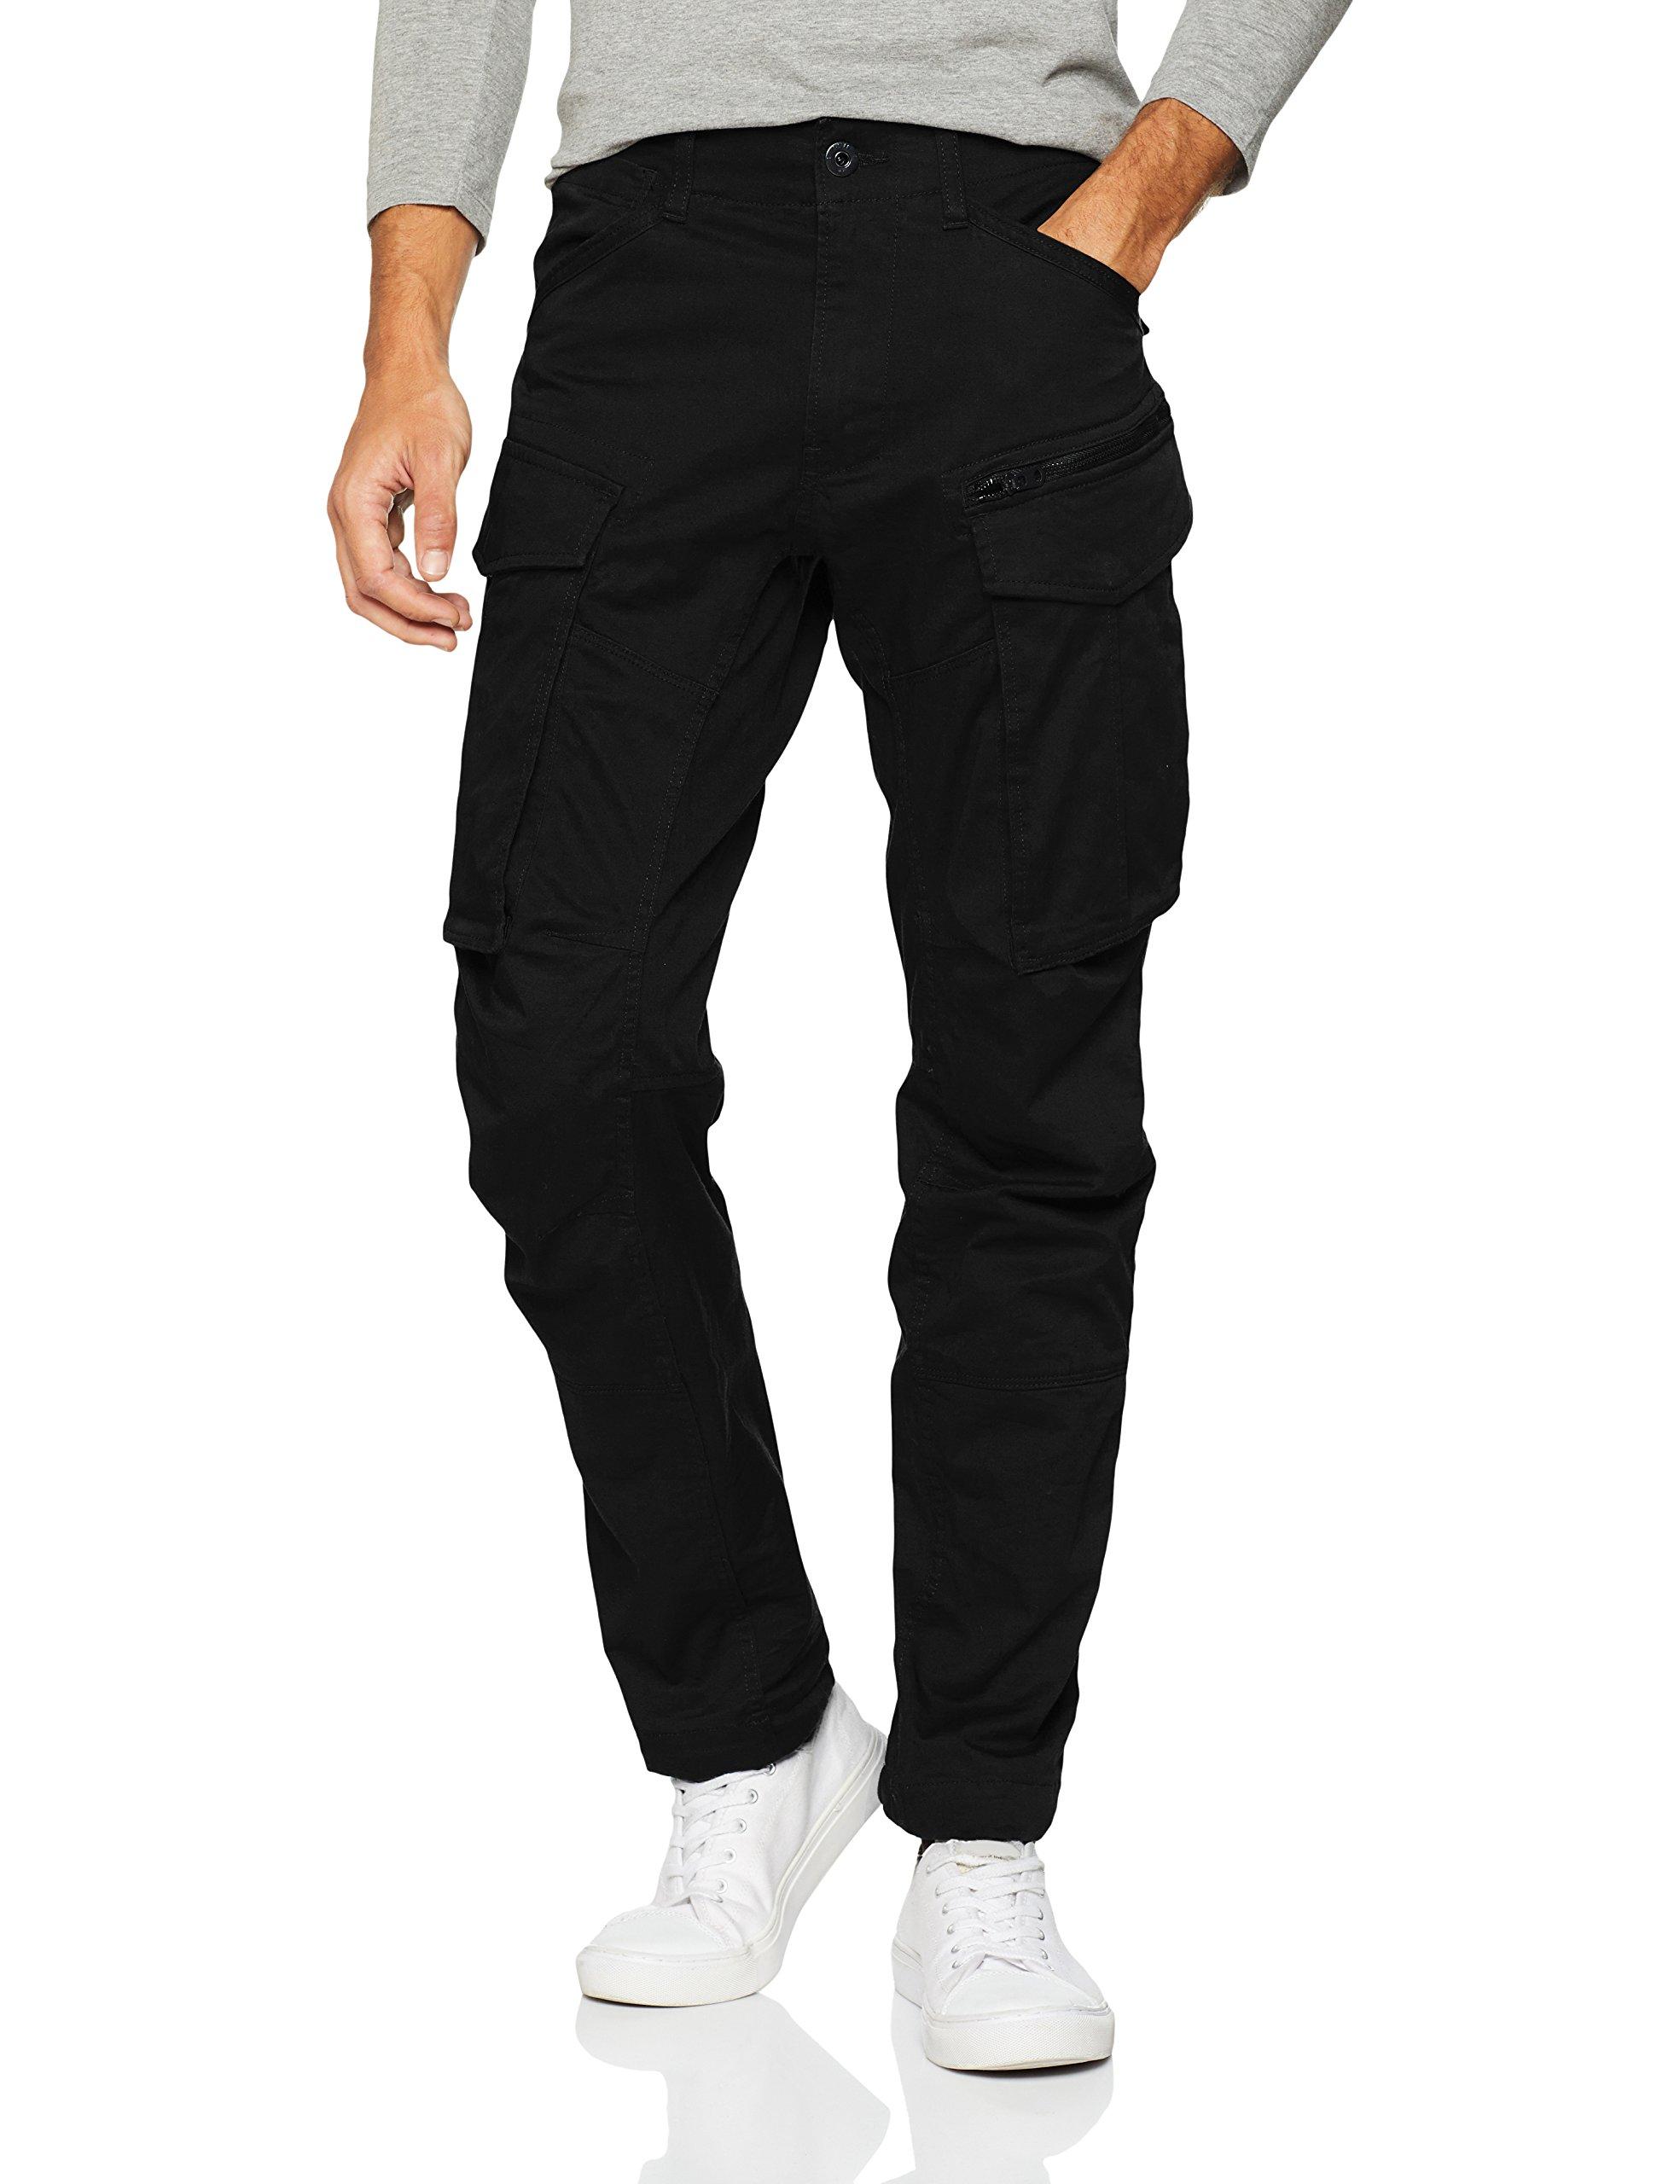 G-Star RAW Rovic Zip 3d Straight Tapered Trousers in Black for Men - Lyst